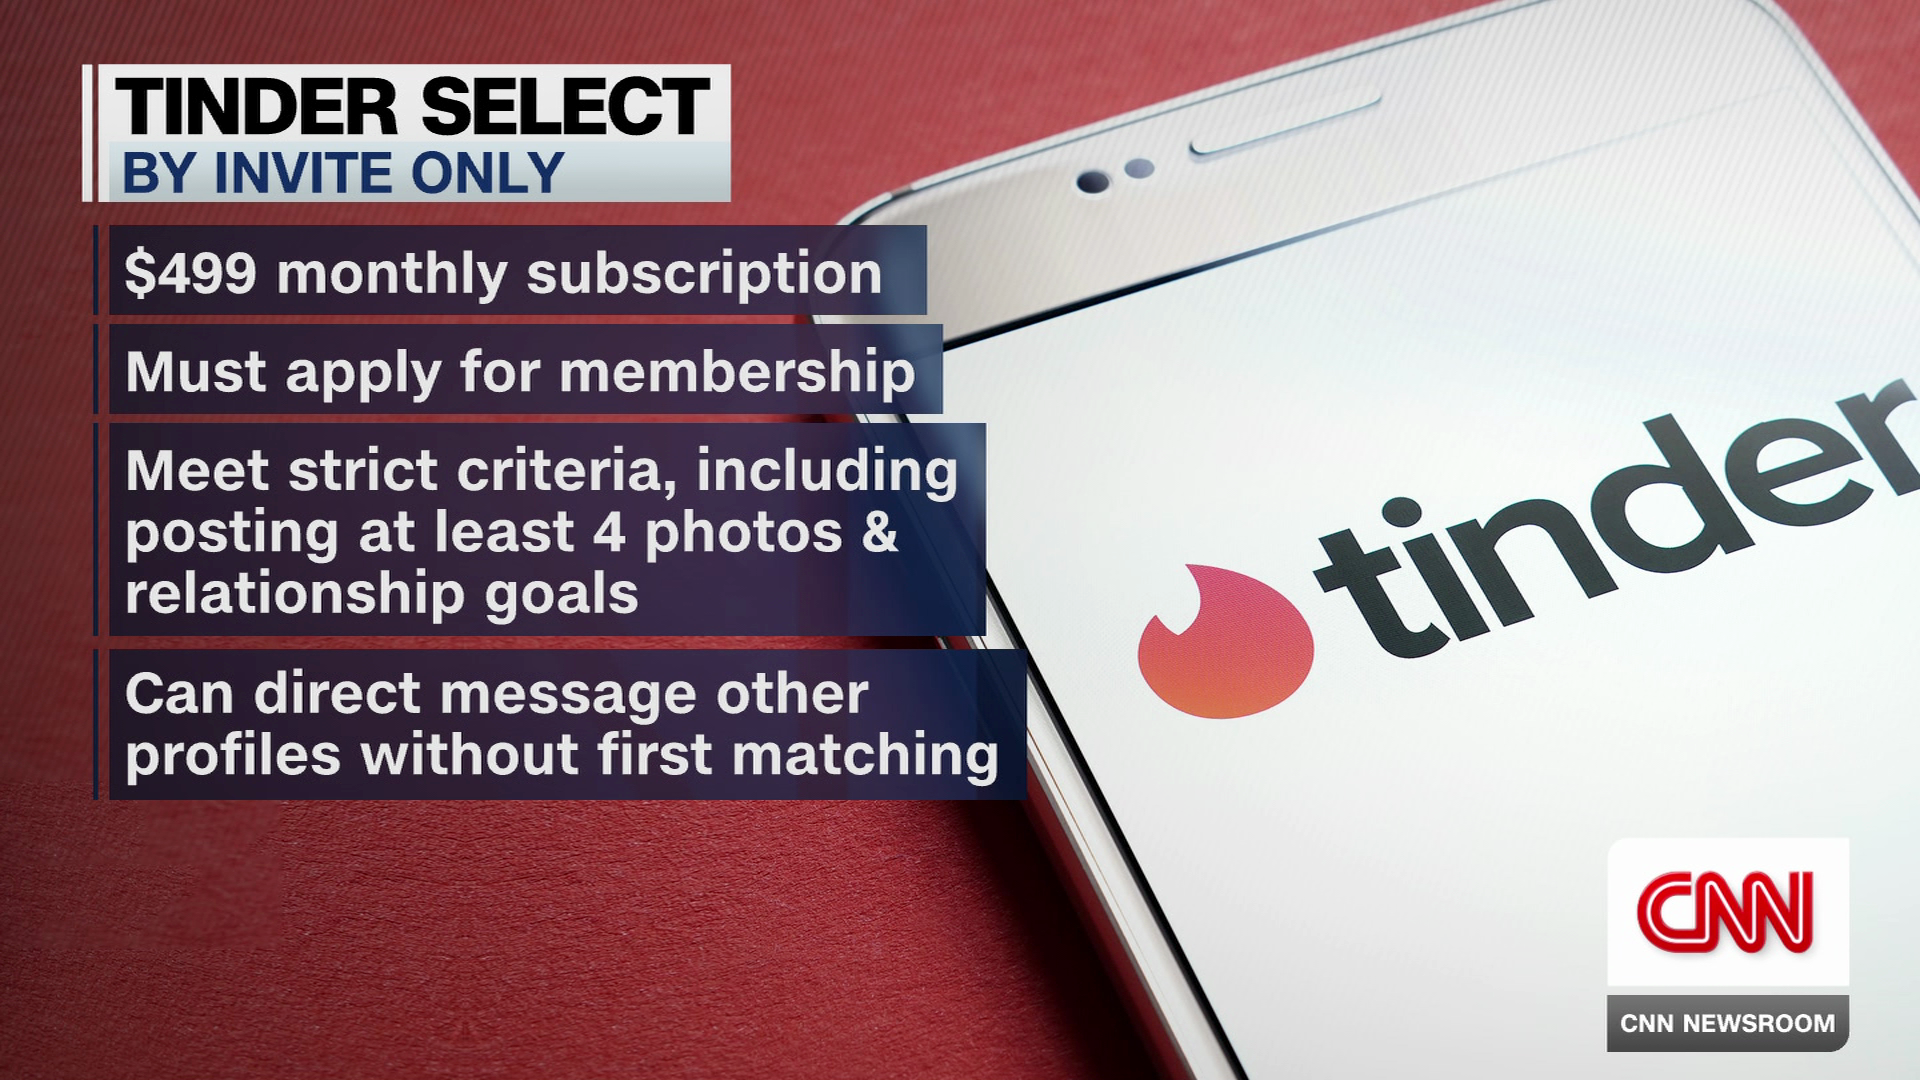 Tinder offers invite-only $499 monthly membership